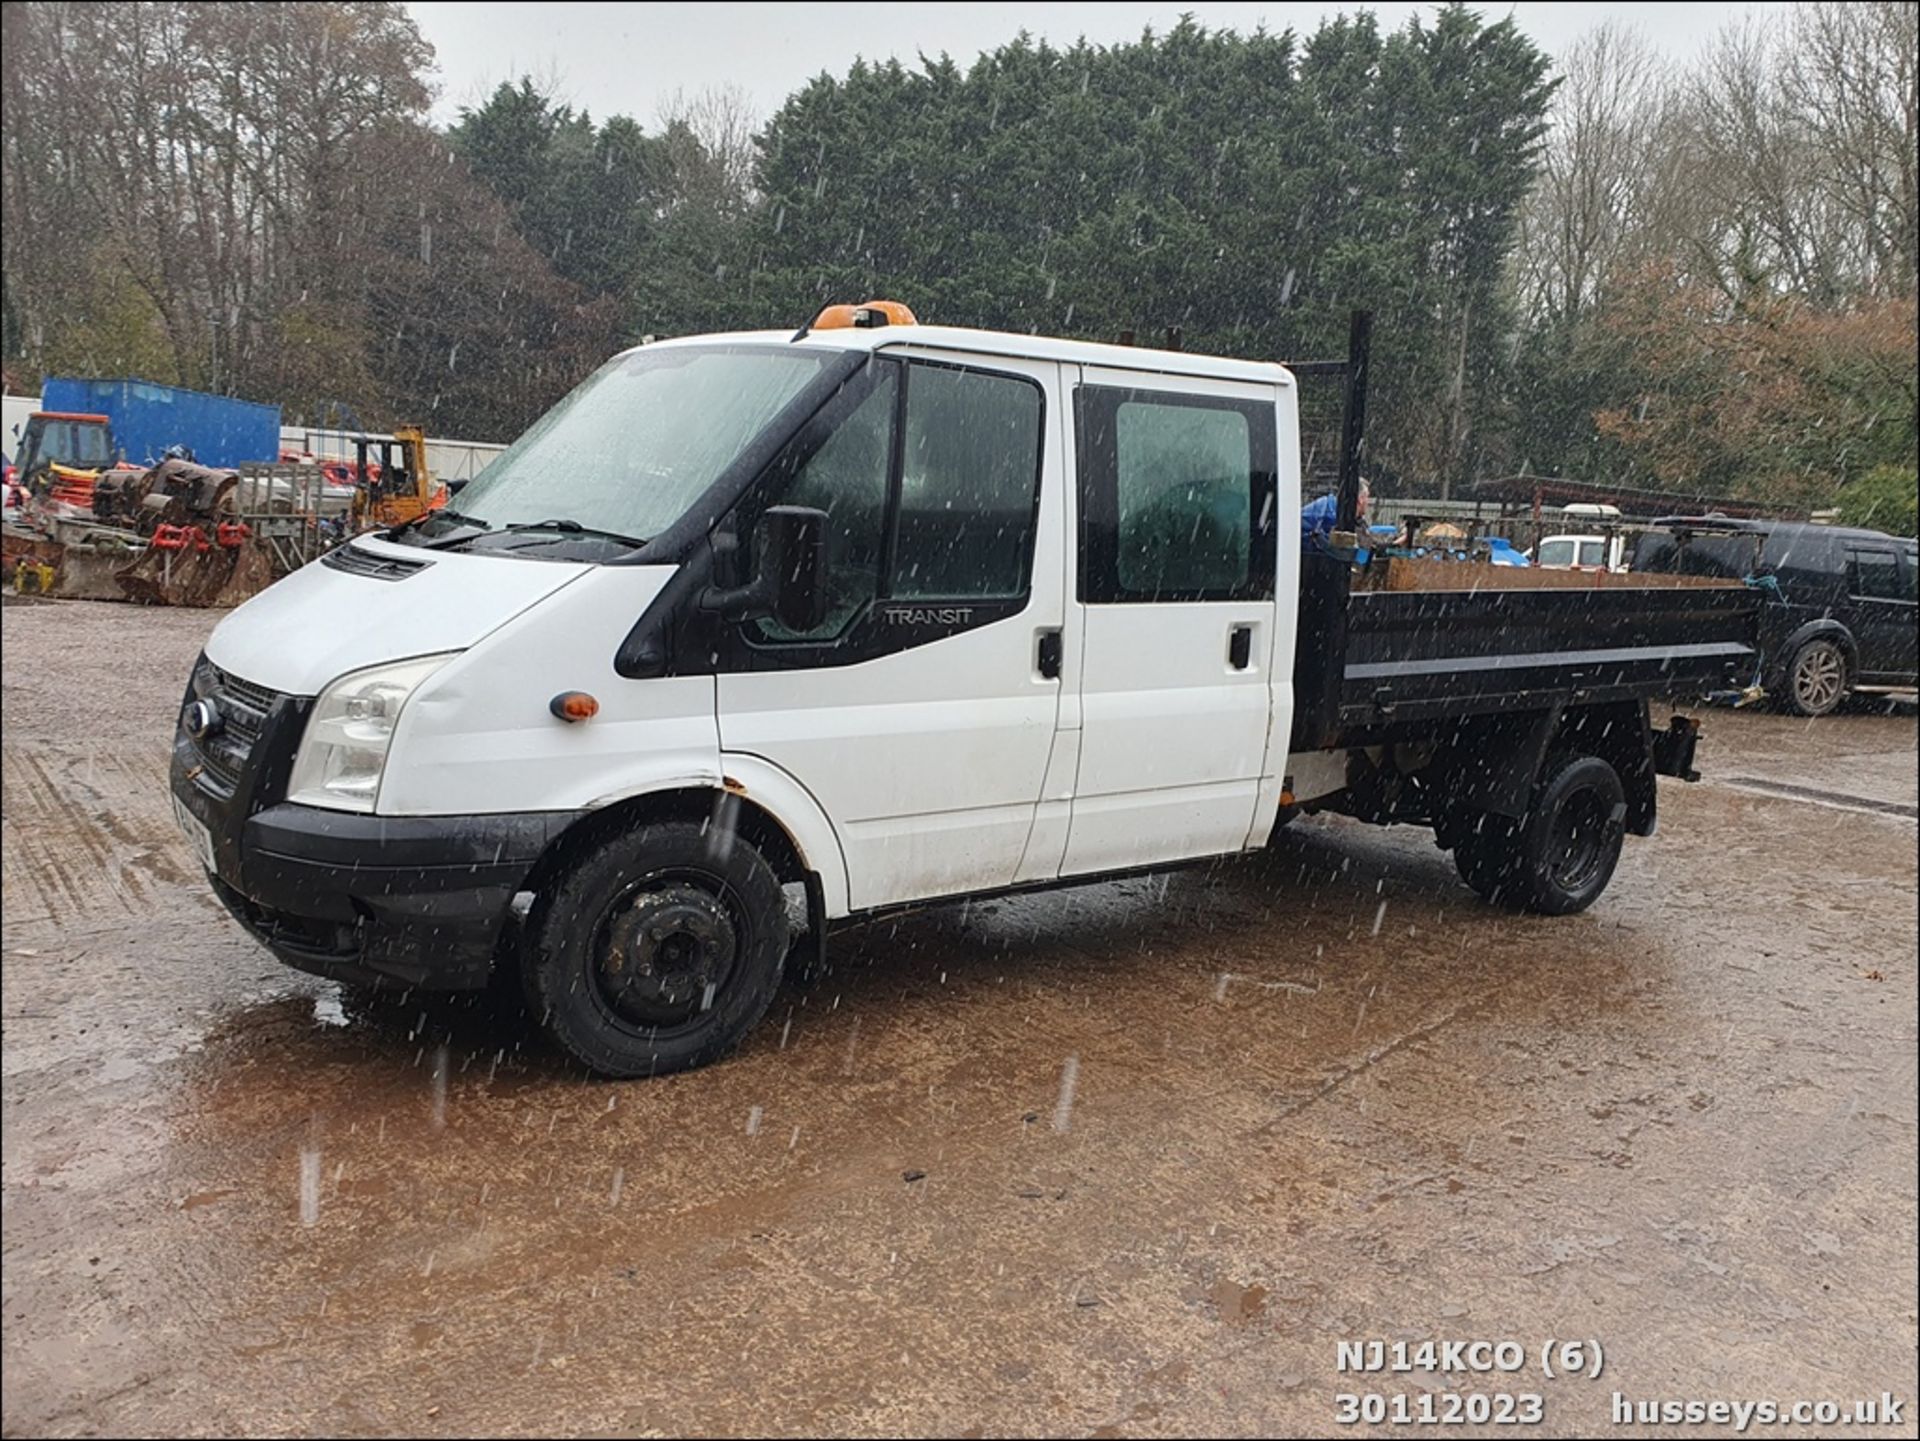 14/14 FORD TRANSIT 100 T350 RWD - 2198cc 4dr Tipper (White, 75k) - Image 7 of 51